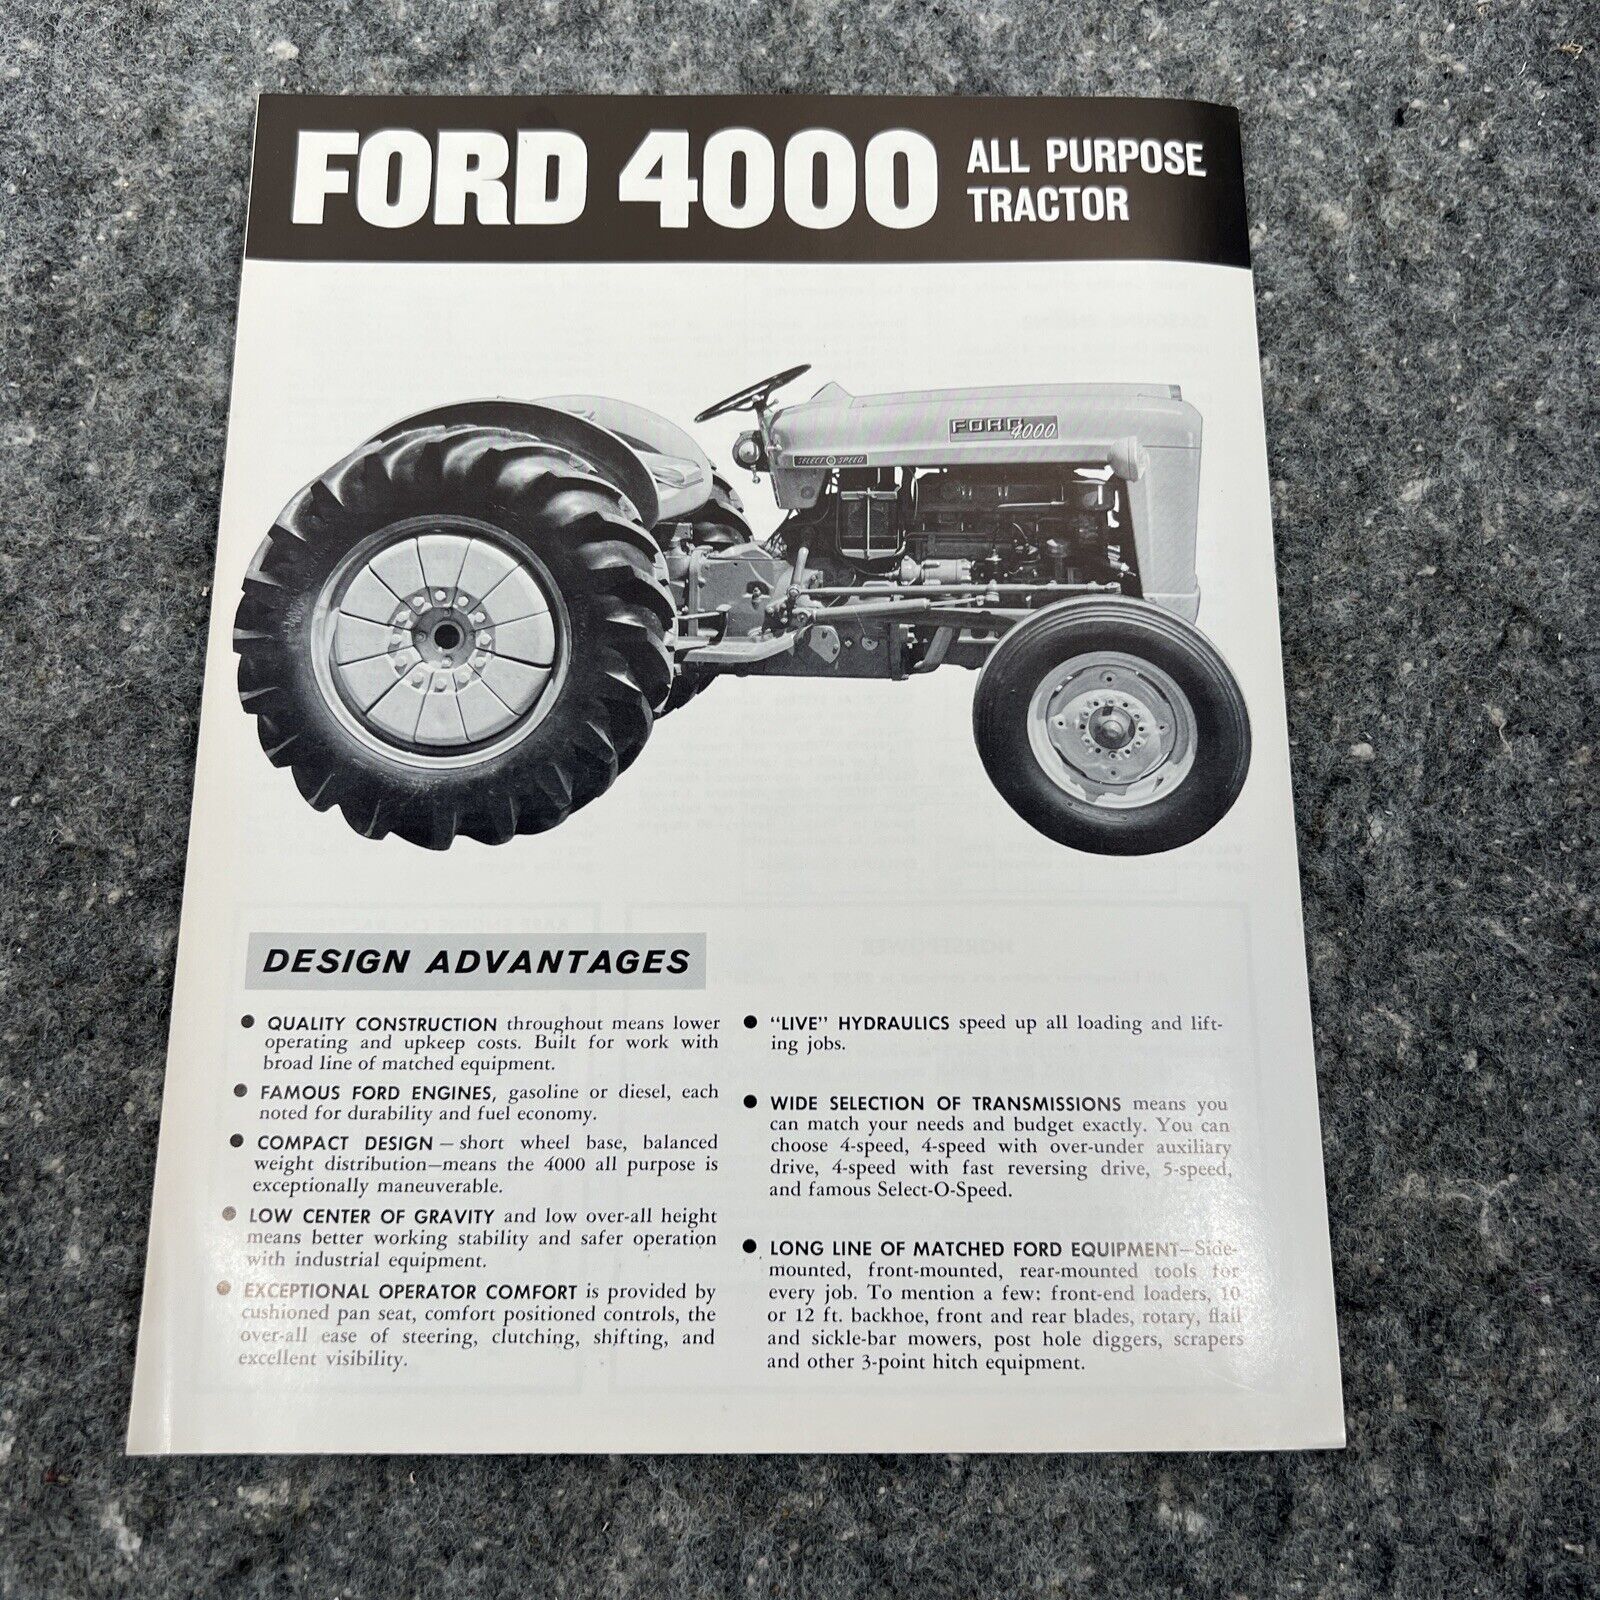 Ford 4000 Tractor Brochure   1963